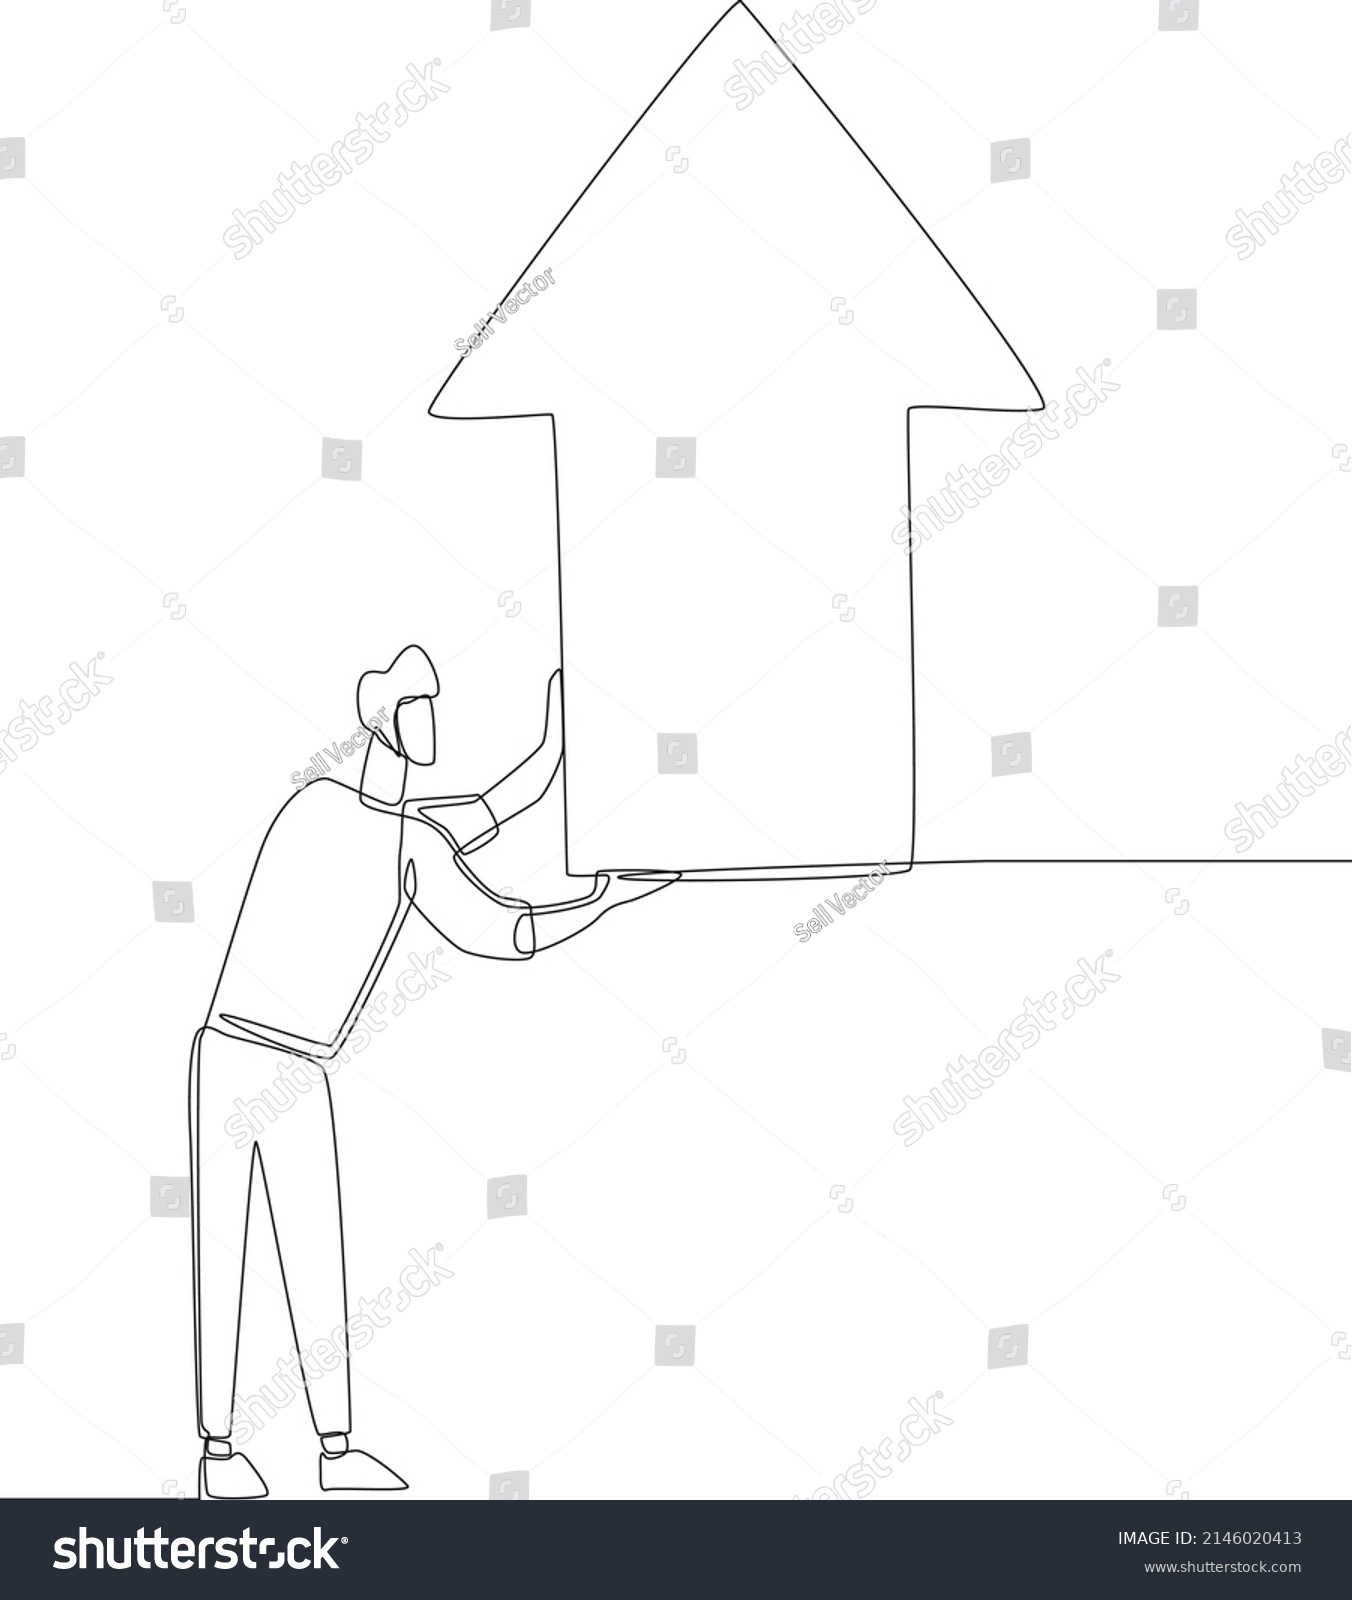 SVG of Continuous one line drawing Young man holding arrow with hands. Stock market buy or sell. Single line draw design vector graphic illustration. svg